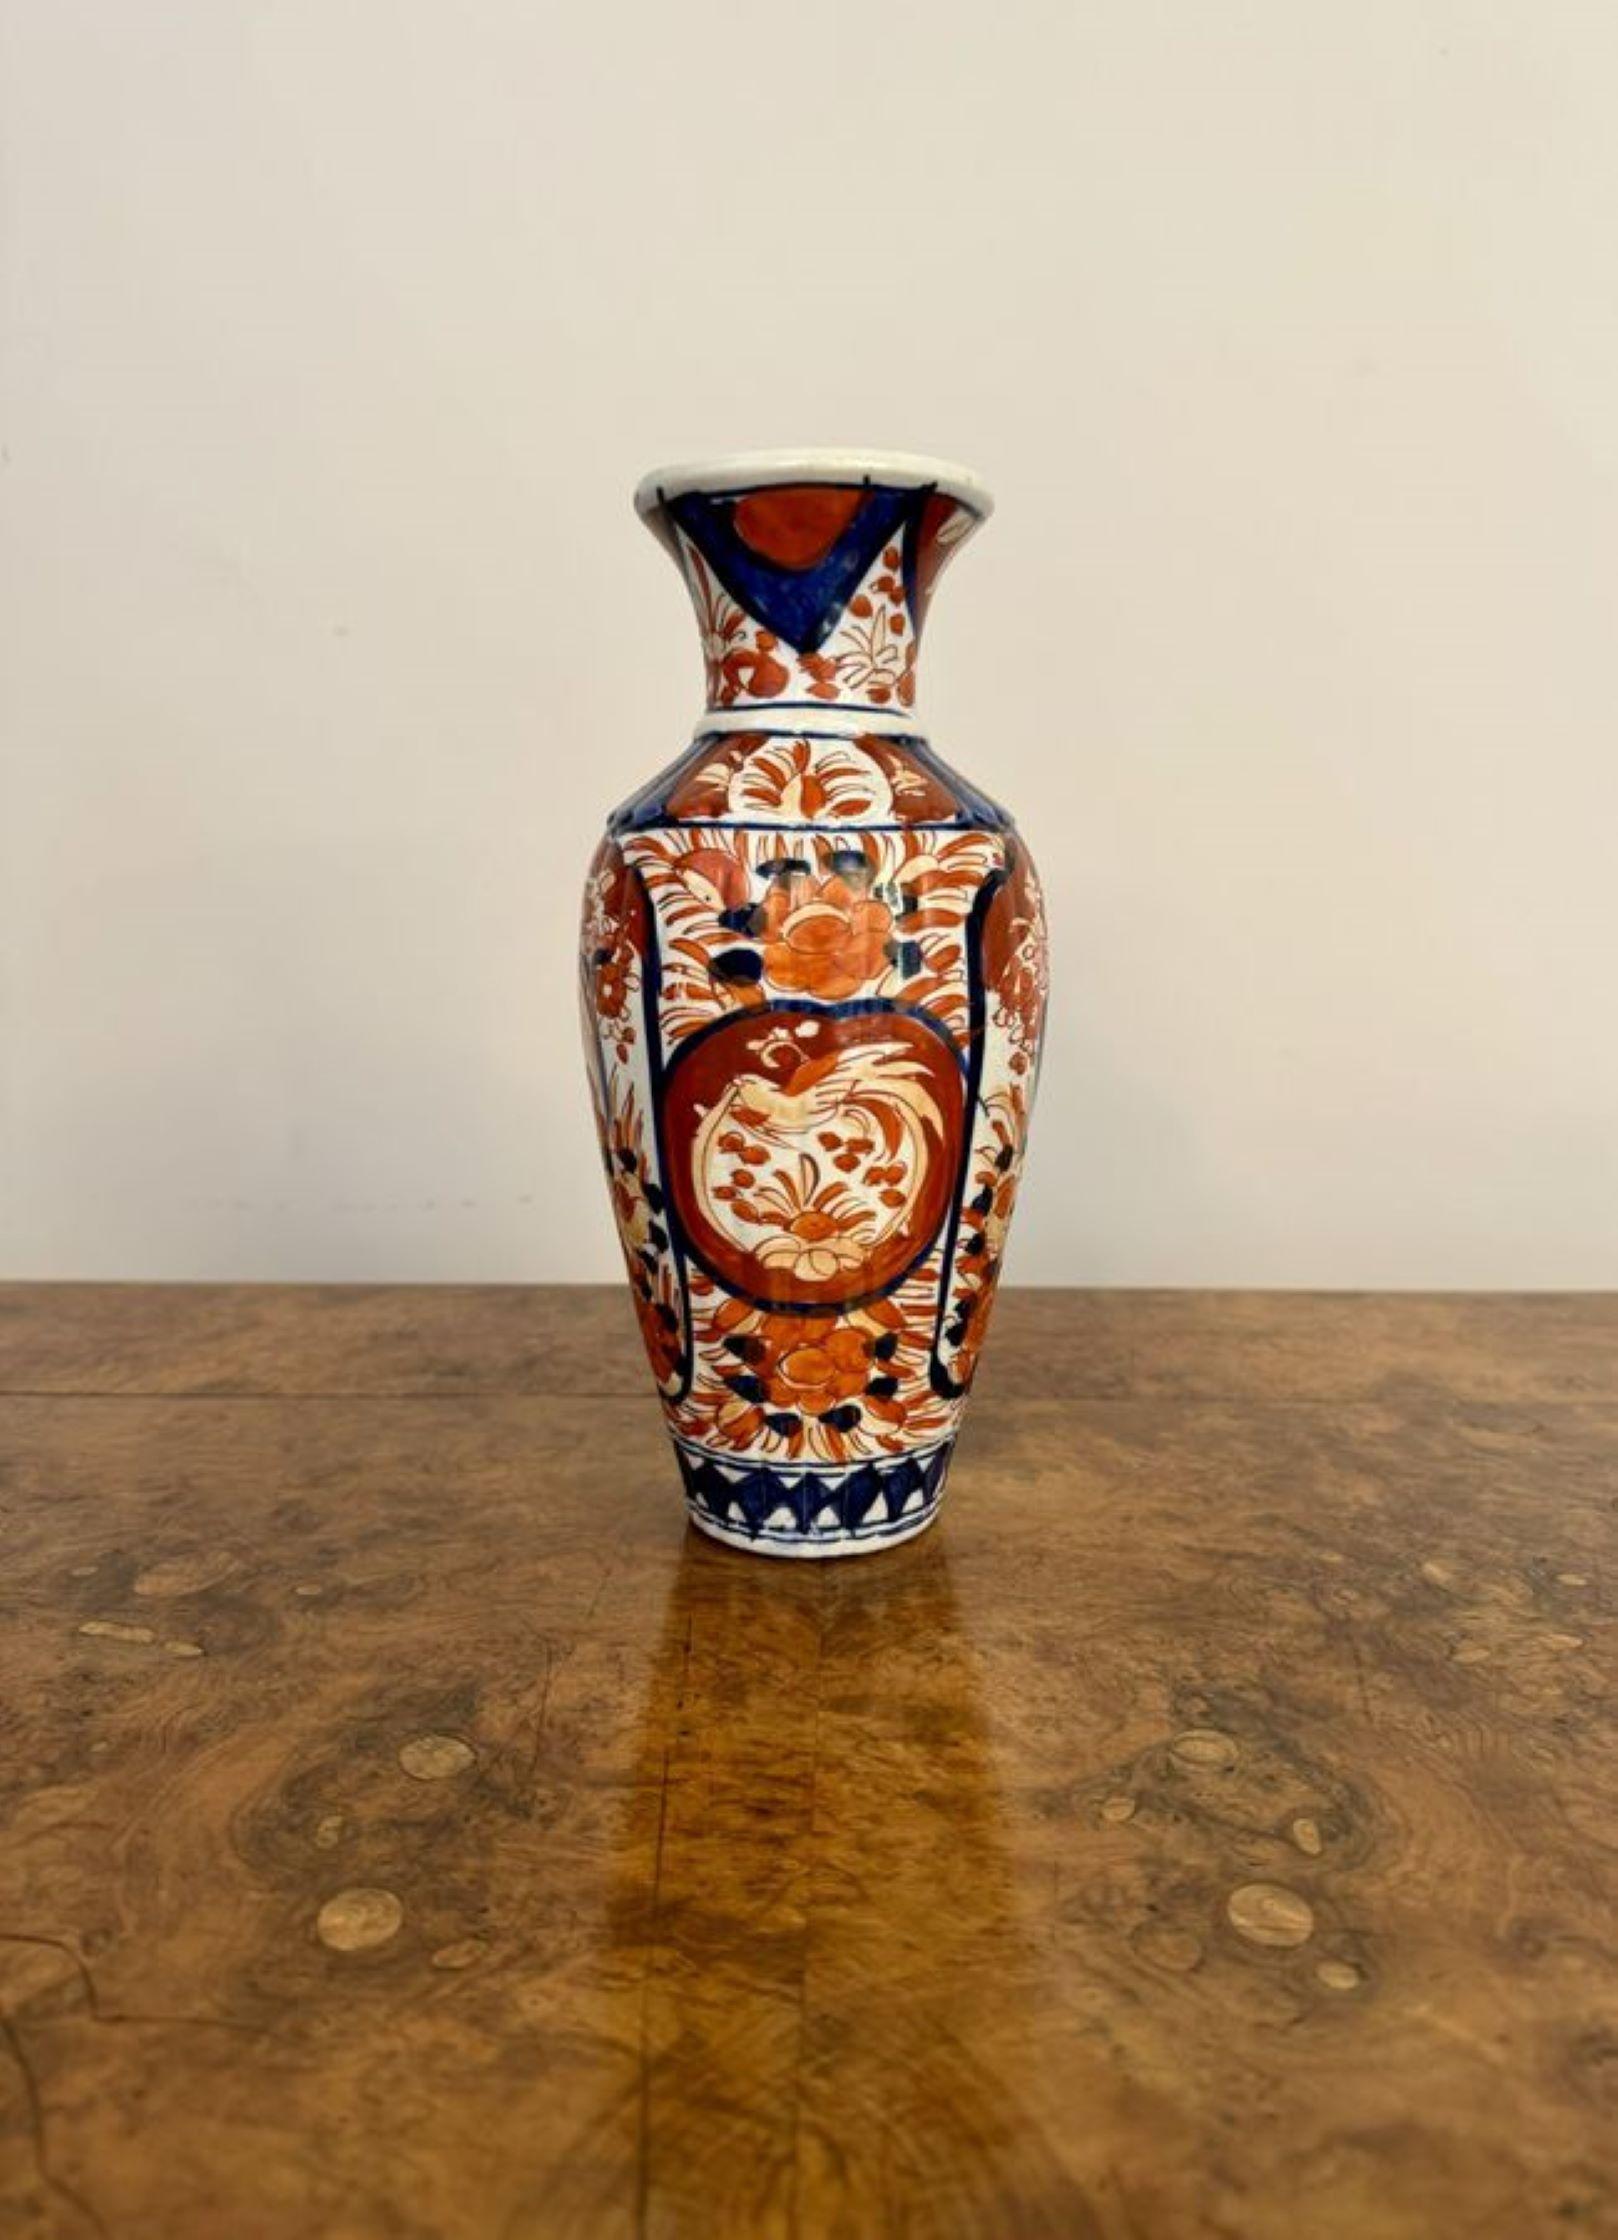 Lovely quality antique Japanese imari vase, having a quality antique Japanese imari shaped vase decorated with trees, flowers, leaves and scrolls hand painted in wonderful red, blue and white colours.

D. 1900